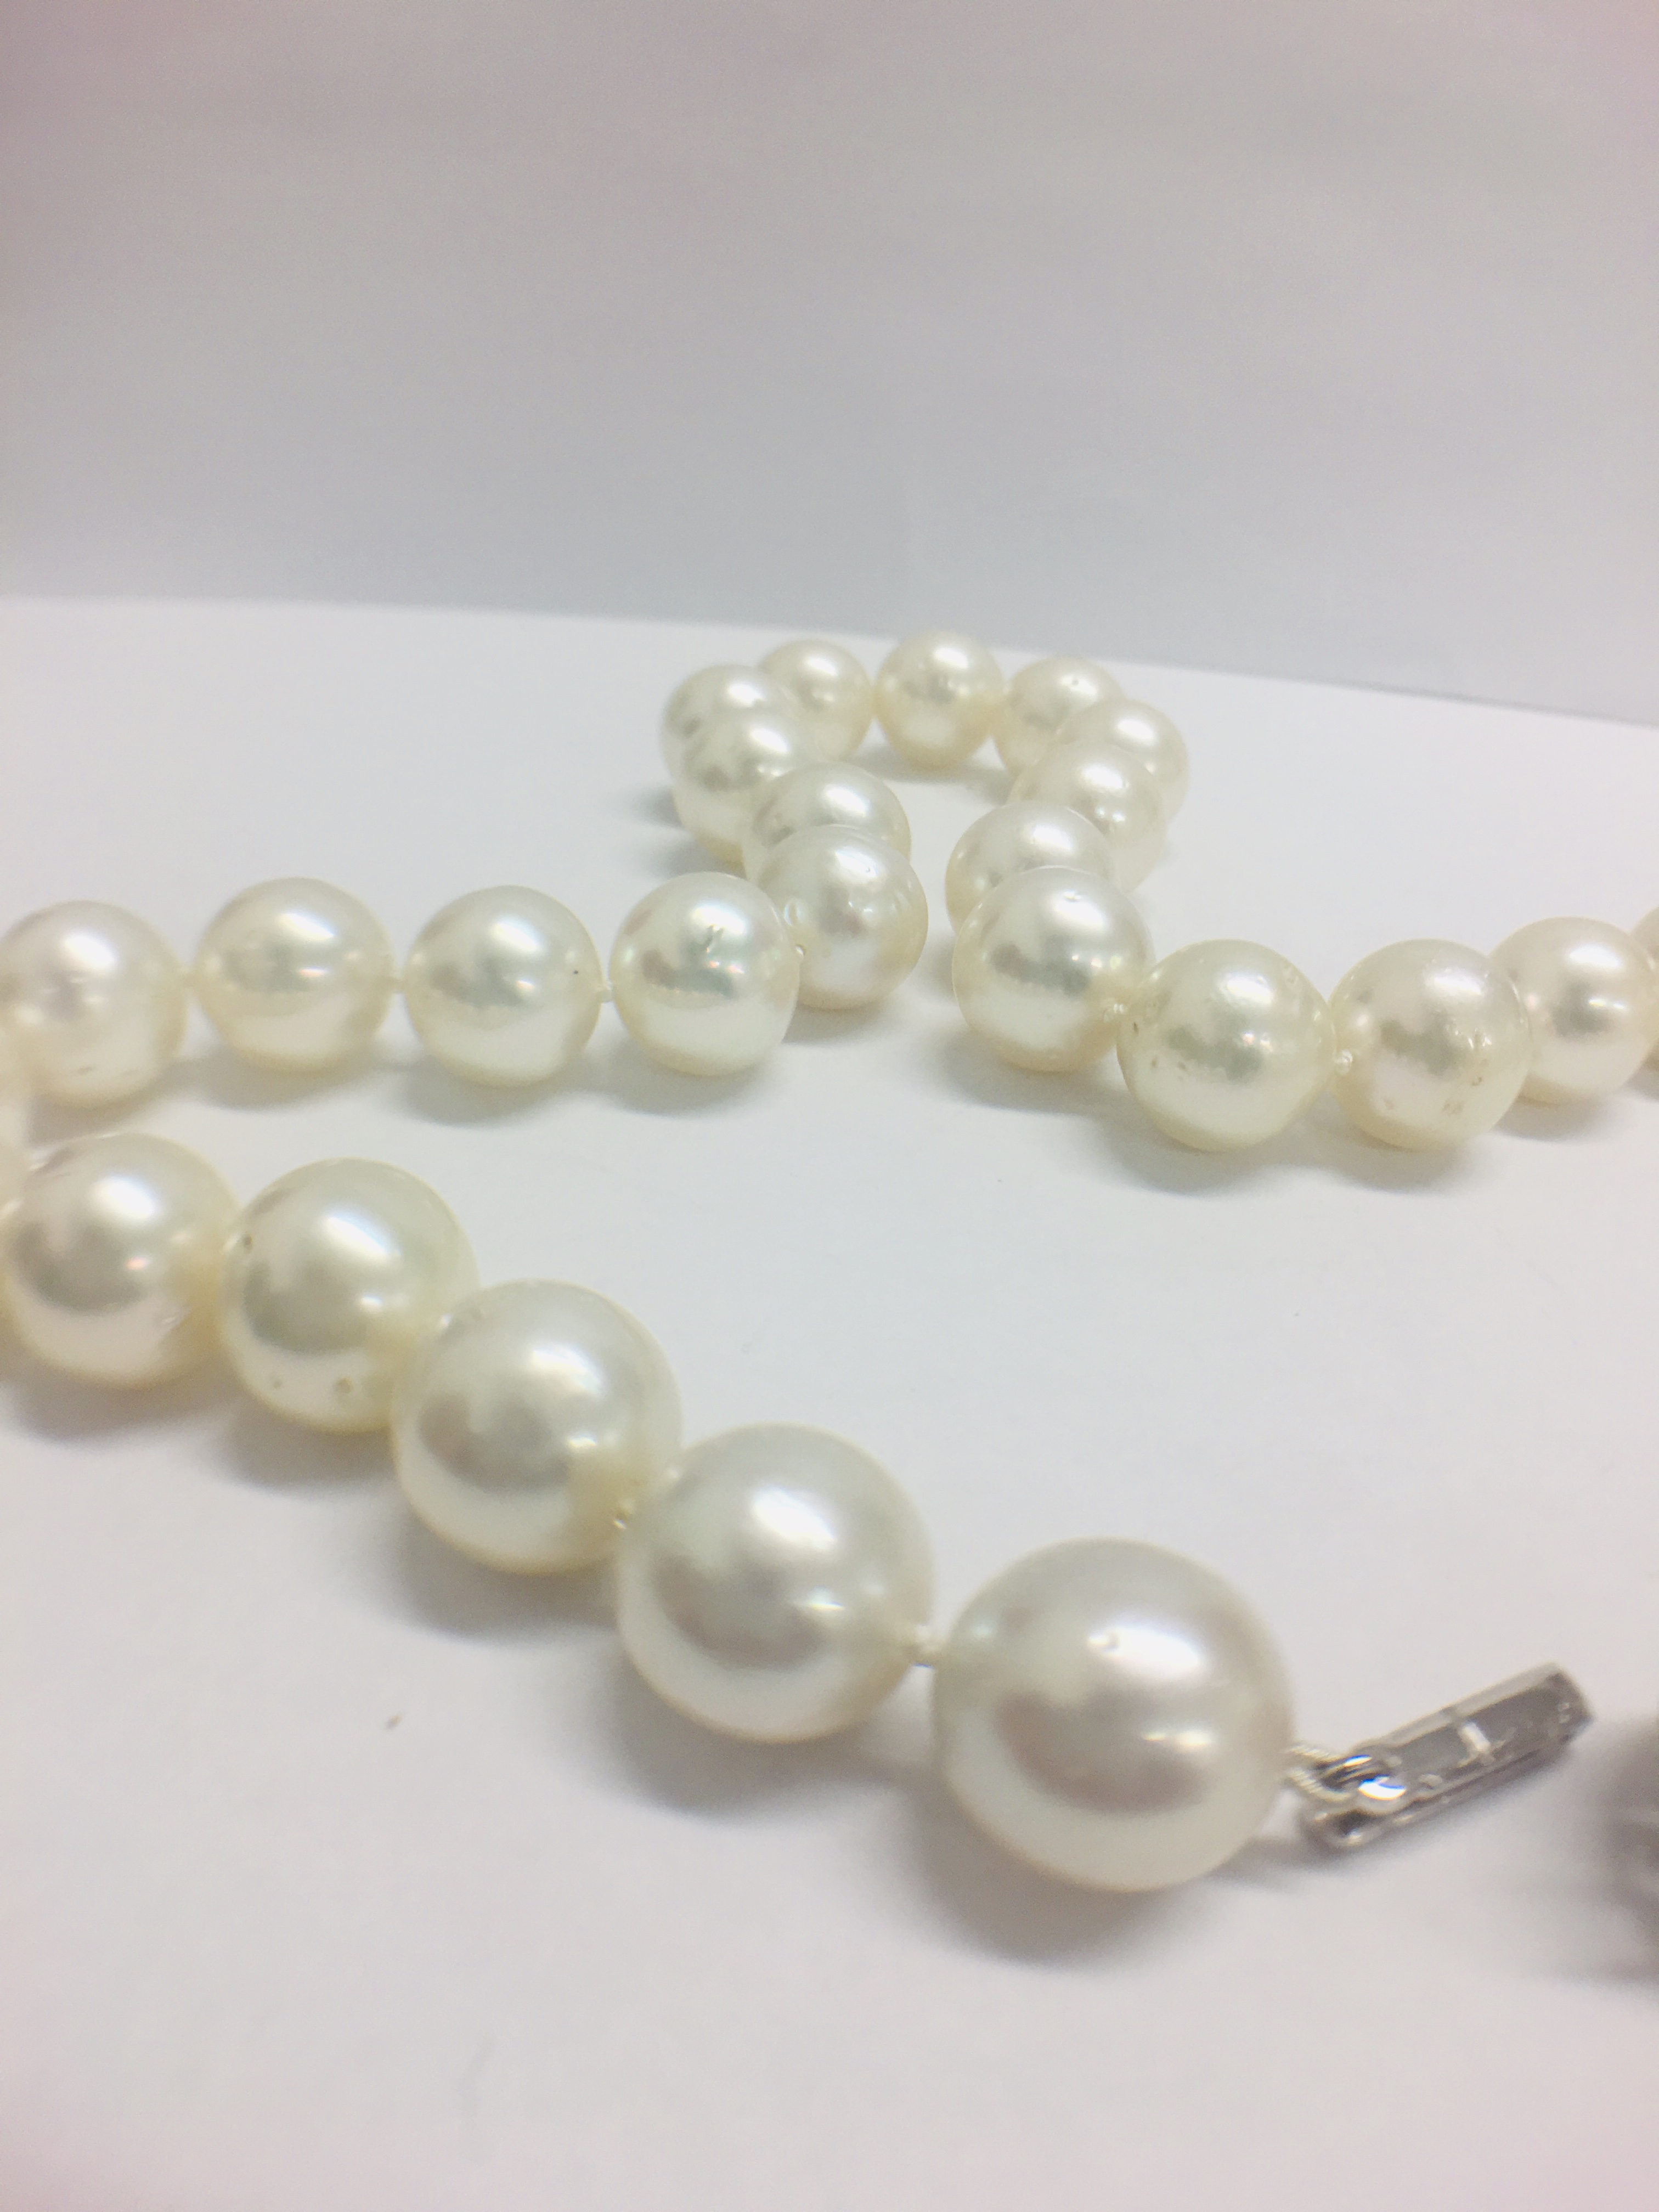 Strand 35 South Sea Pearls With 14Ct White Gold Filagree Style Ball Clasp. - Image 3 of 10